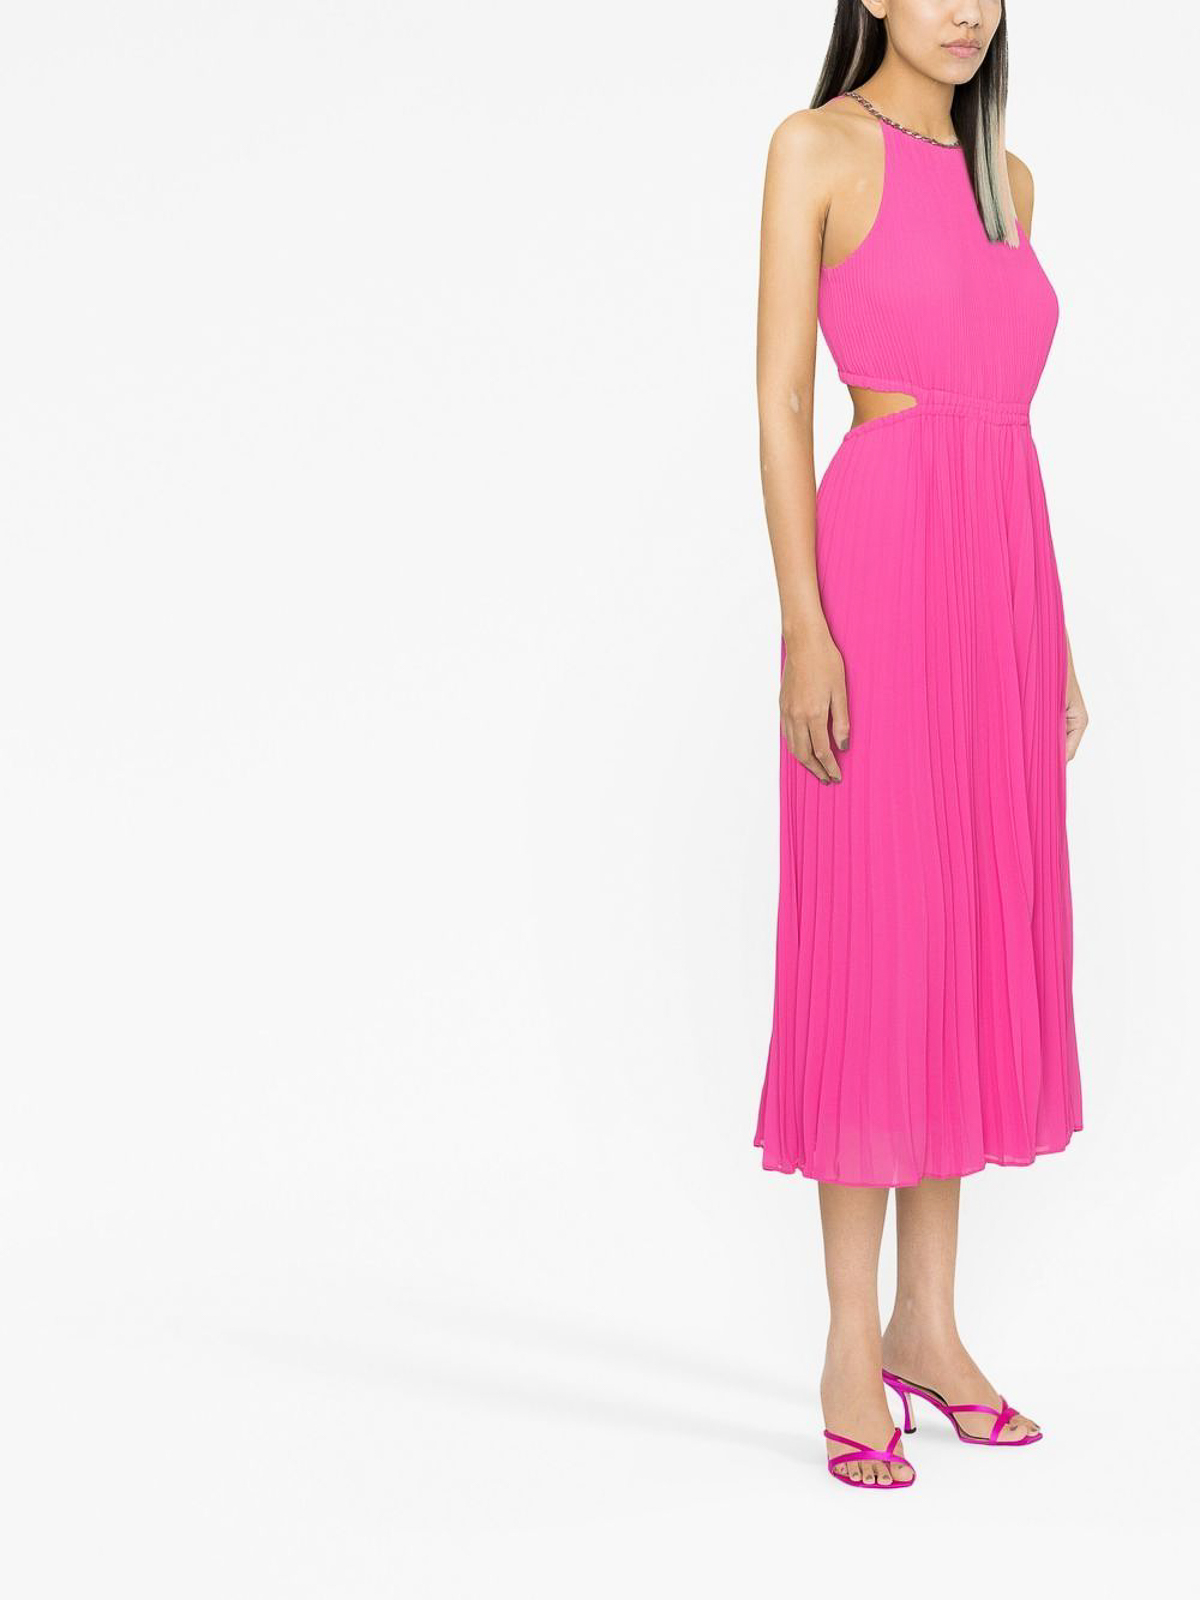 MICHAEL KORS Michael dress in recycled viscose blend  Lime  Michael Kors  dress MS381M033D online on GIGLIOCOM